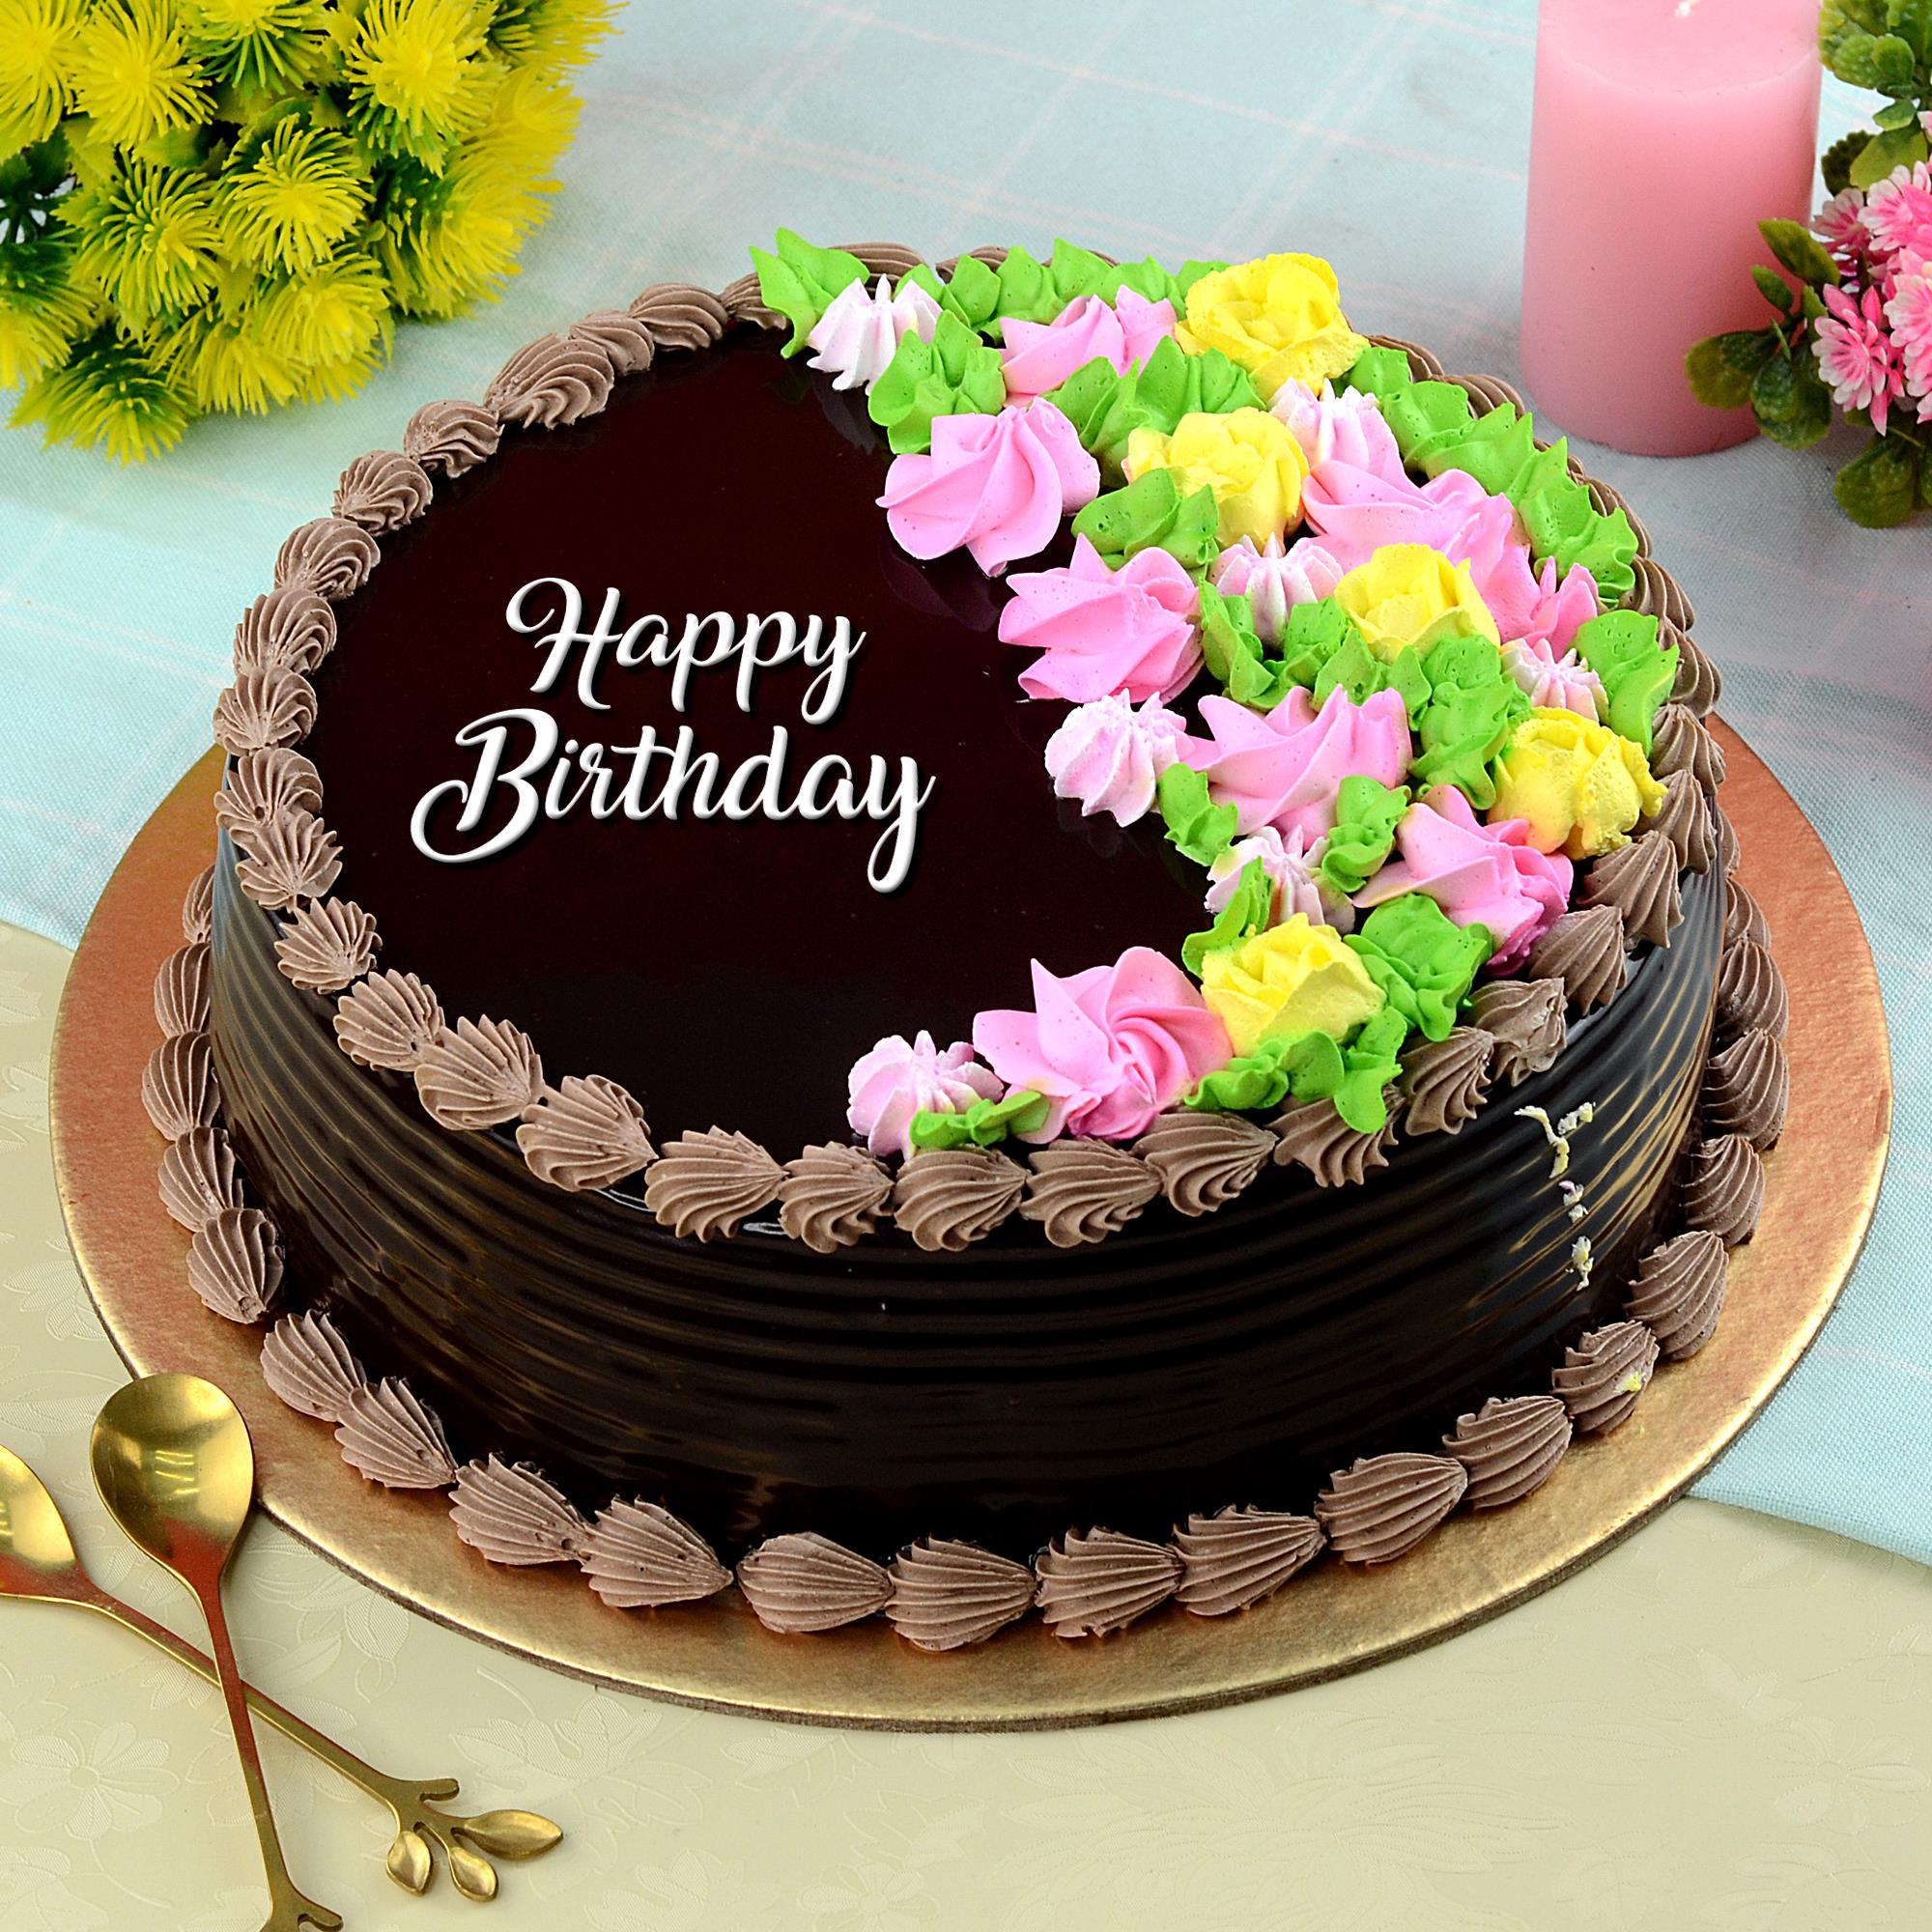 Send happy birthday cake with gems topping online by GiftJaipur in Rajasthan